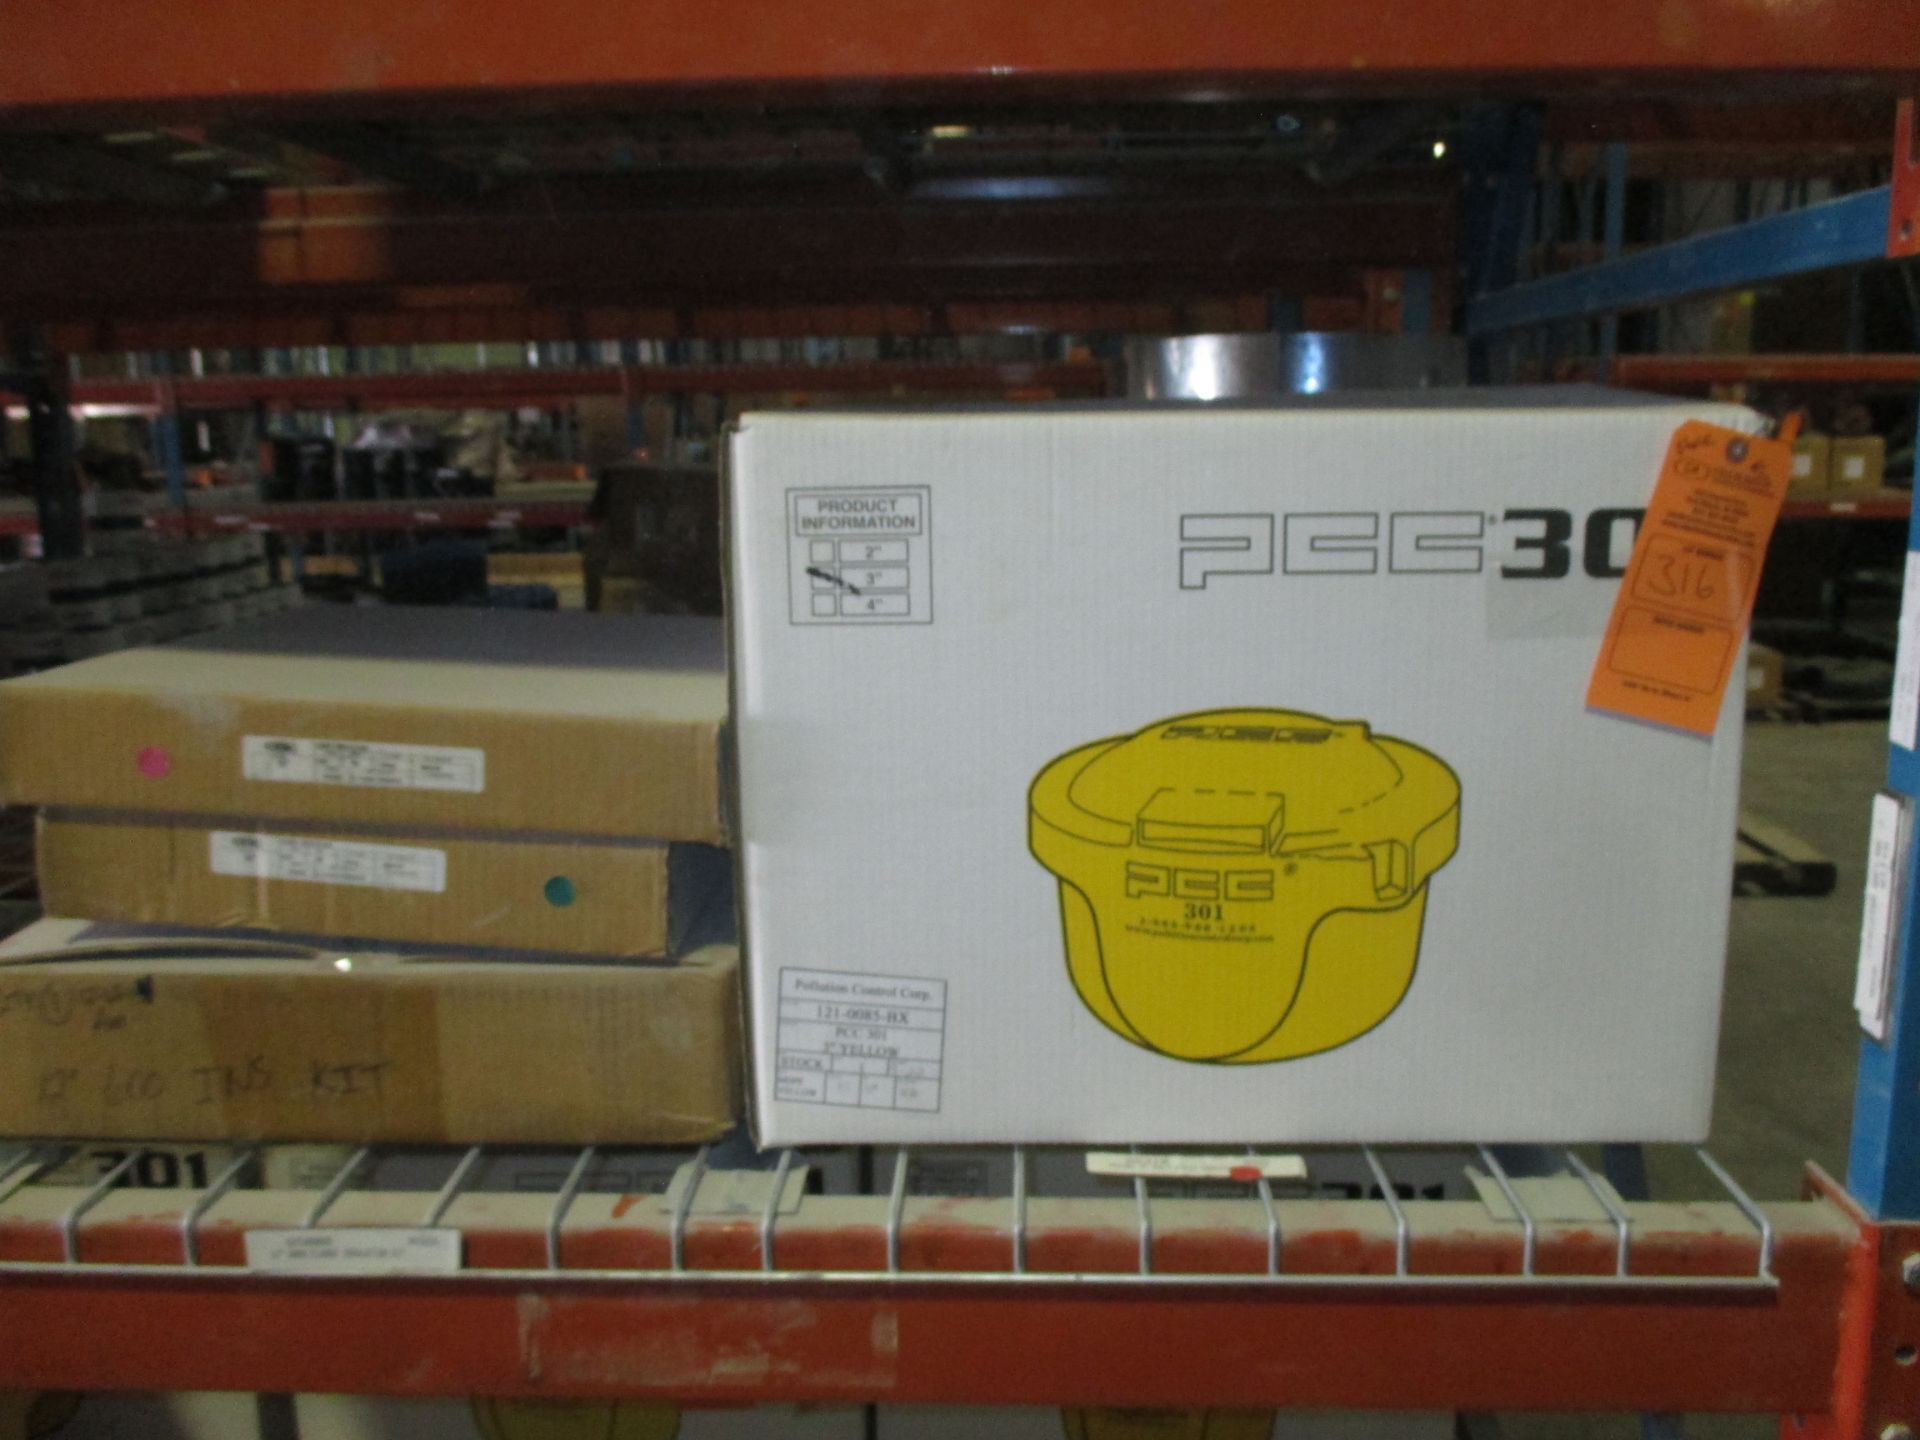 (1) PCC 301 M# 121-0085-BX; 3" YELLOW BLOW TANK & (3) FLANGE INSULATION KITS INCLUDING CENTRAL 12'